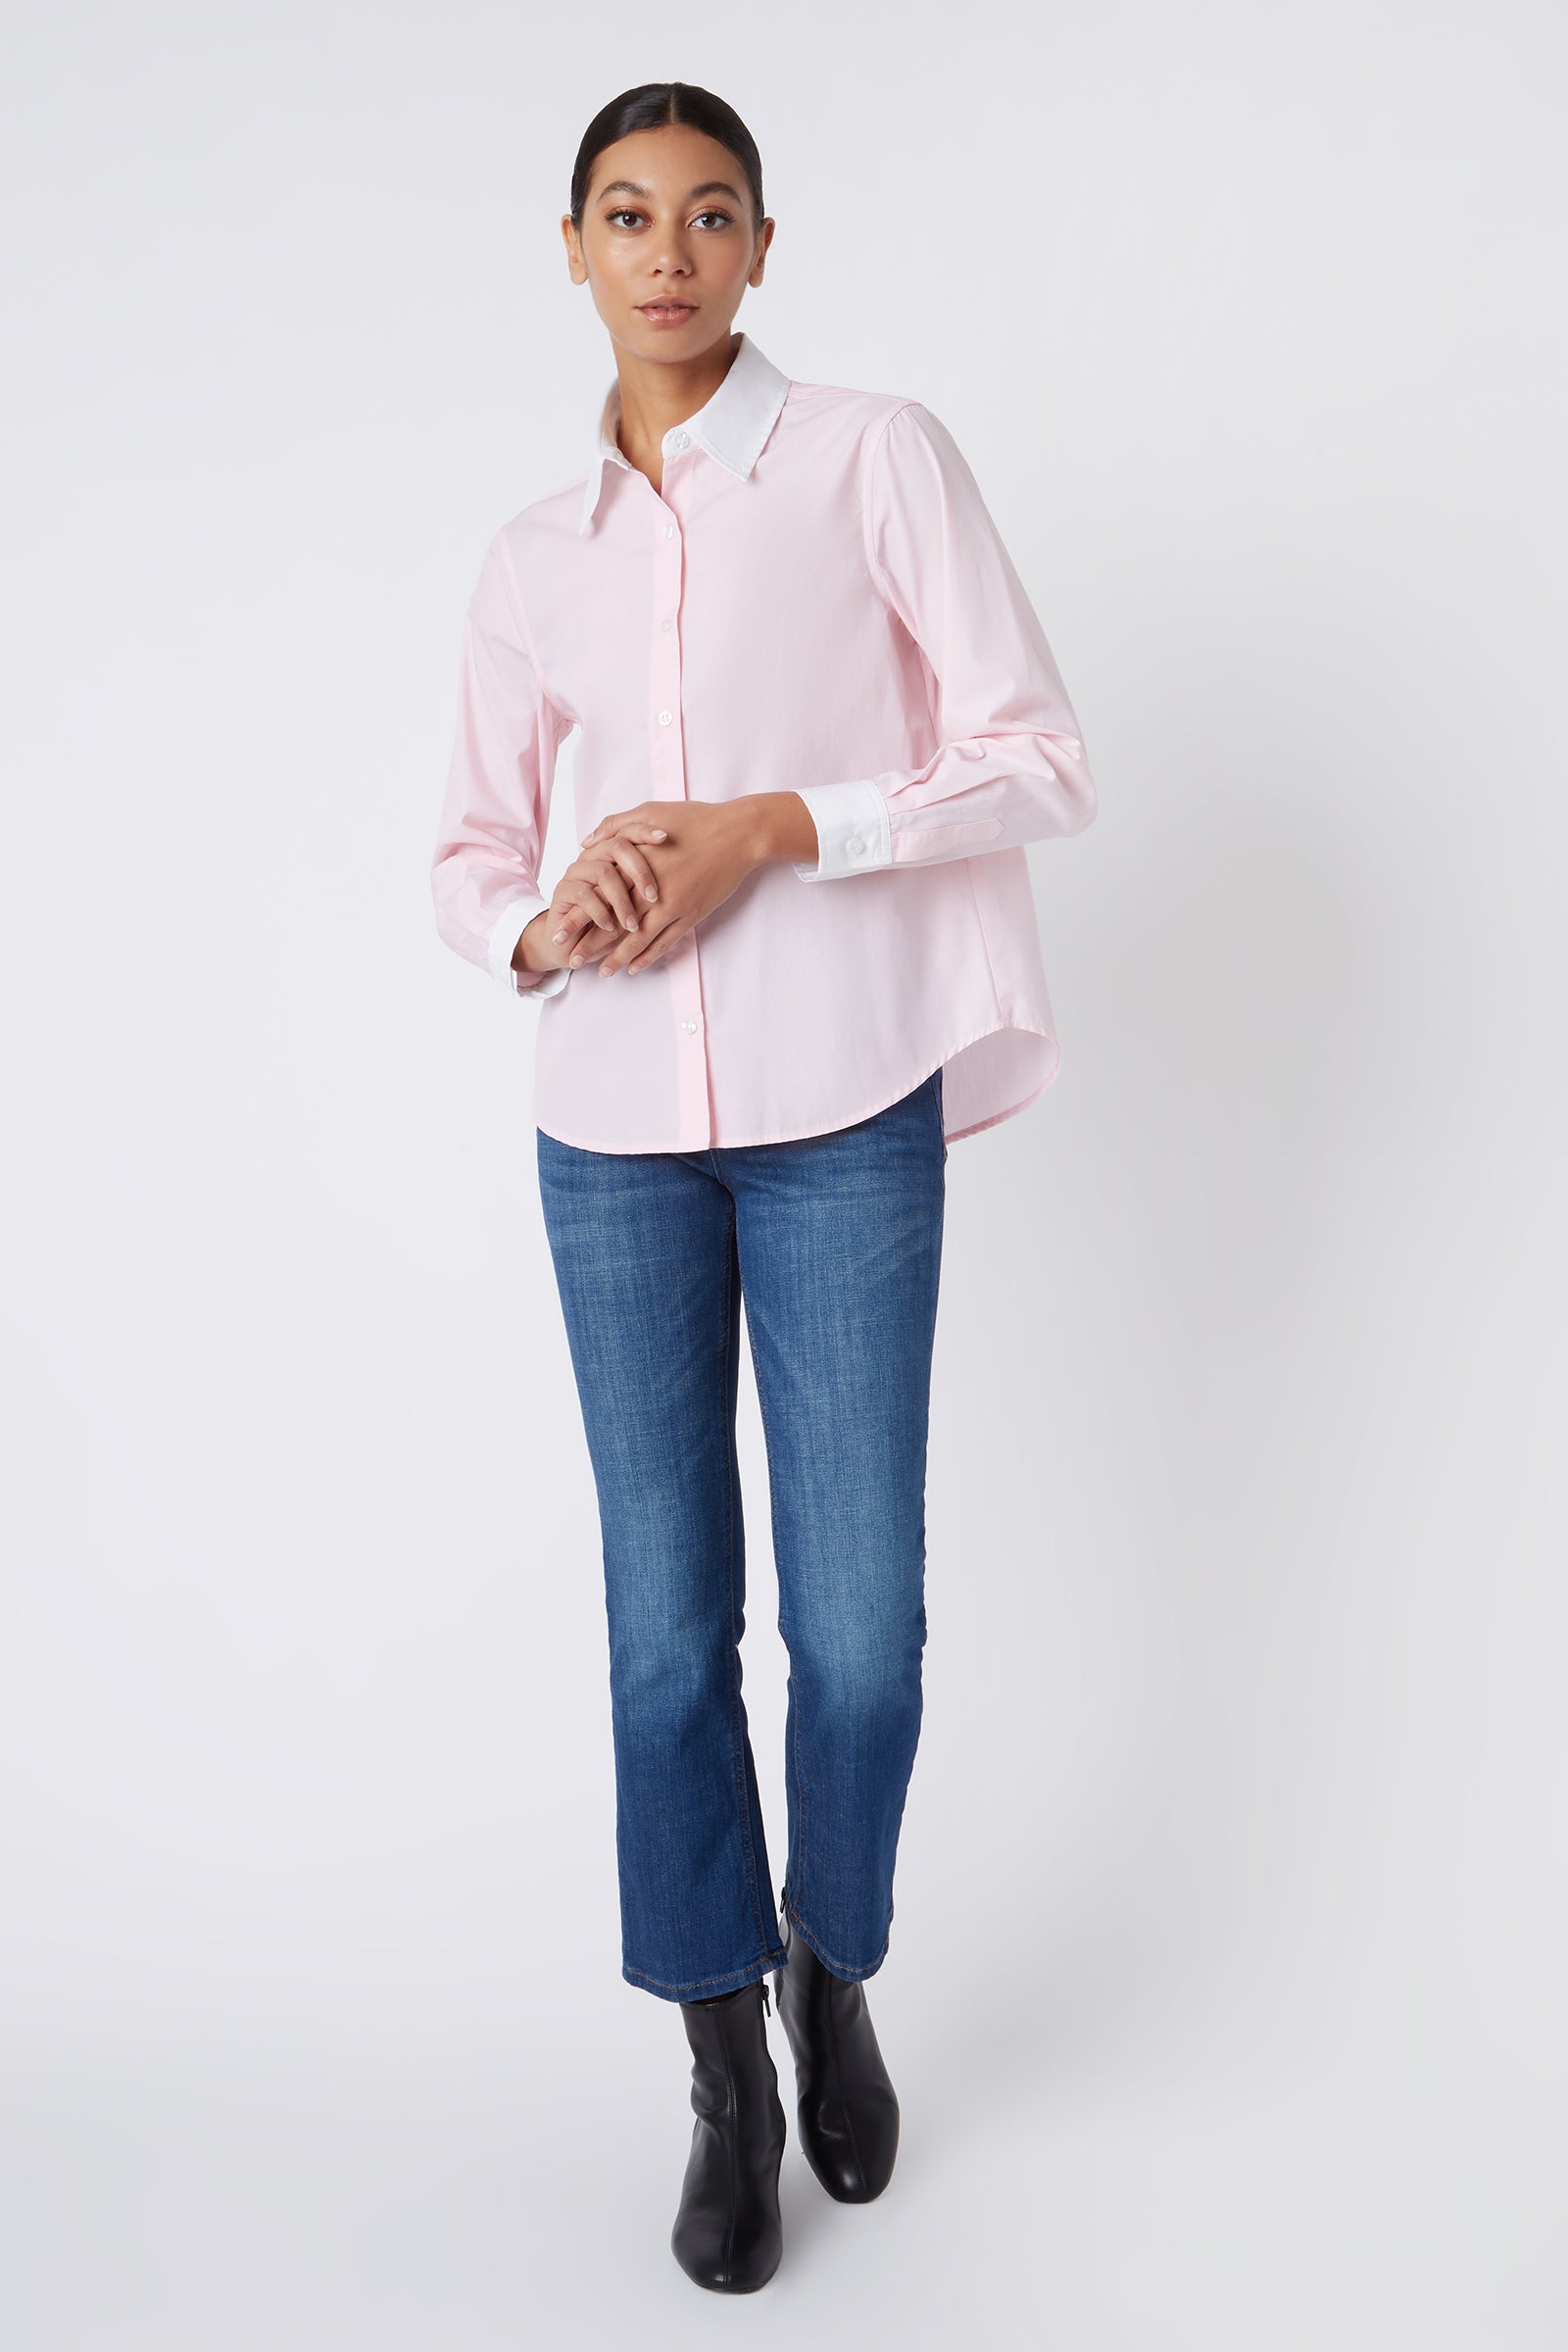 Kal Rieman Classic Tailored Shirt in Pink with White on Model Main Full Front View